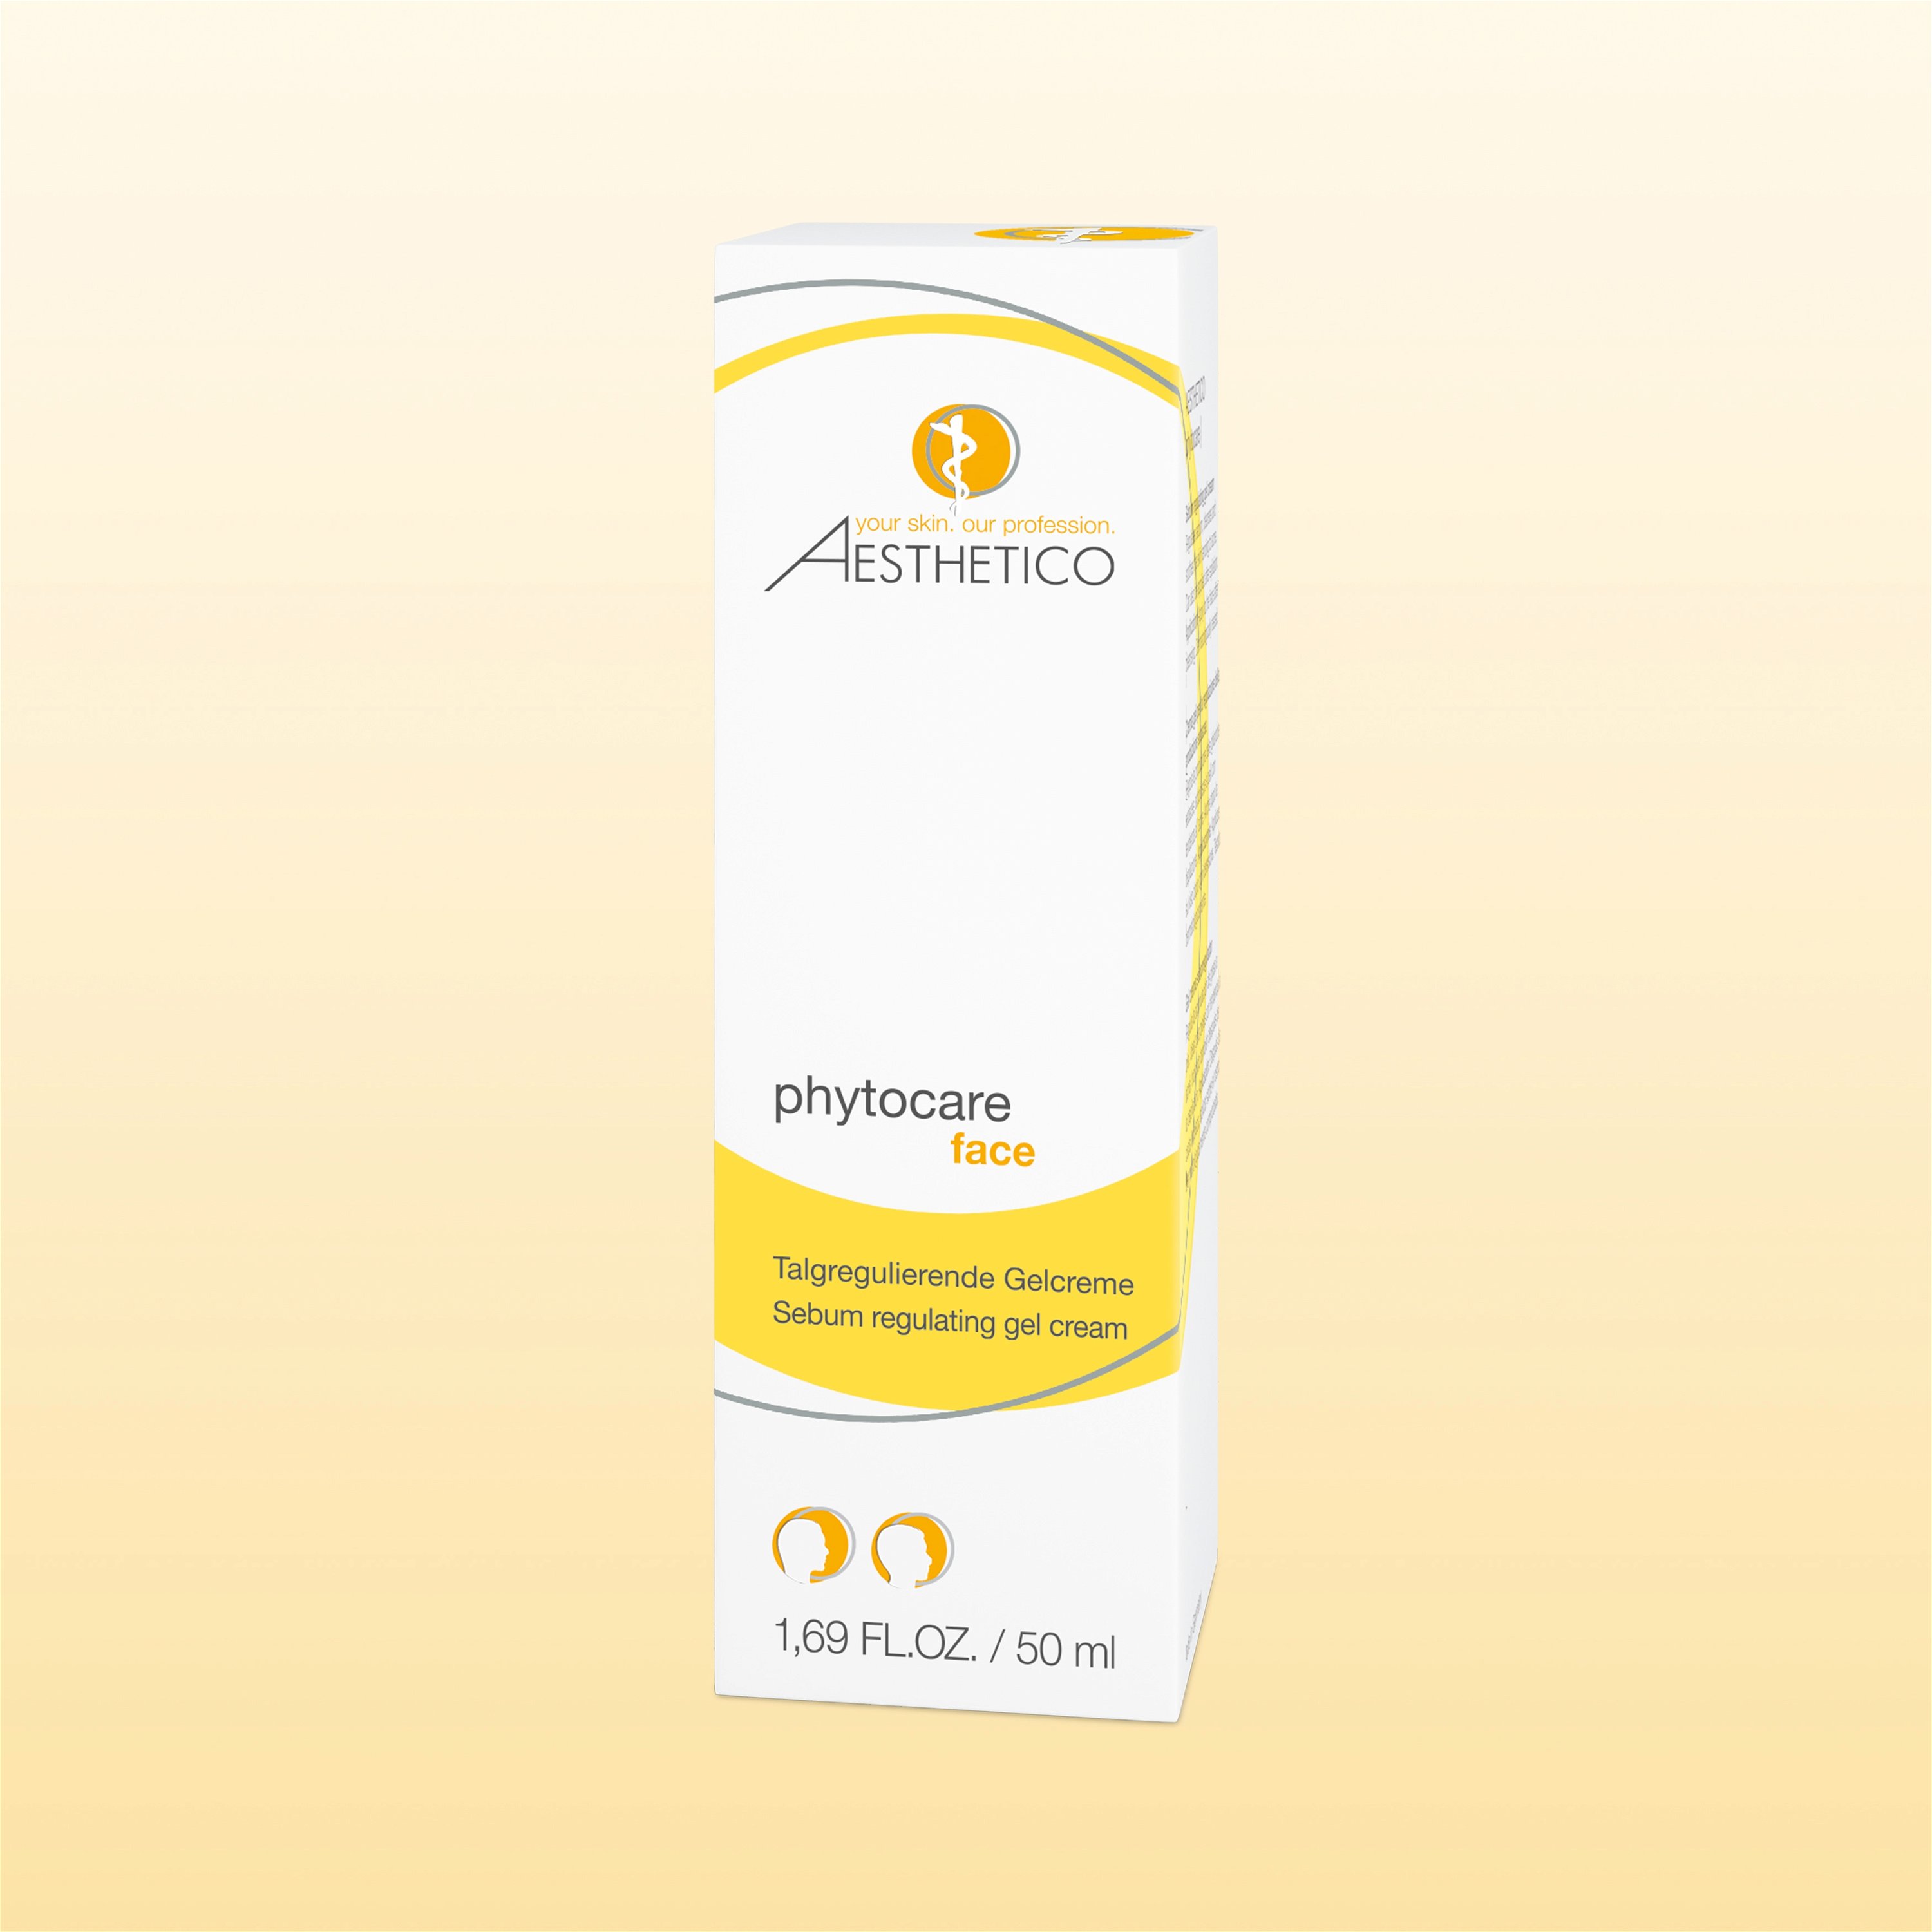 Umverpackung AESTHETICO phytocare, 50 ml